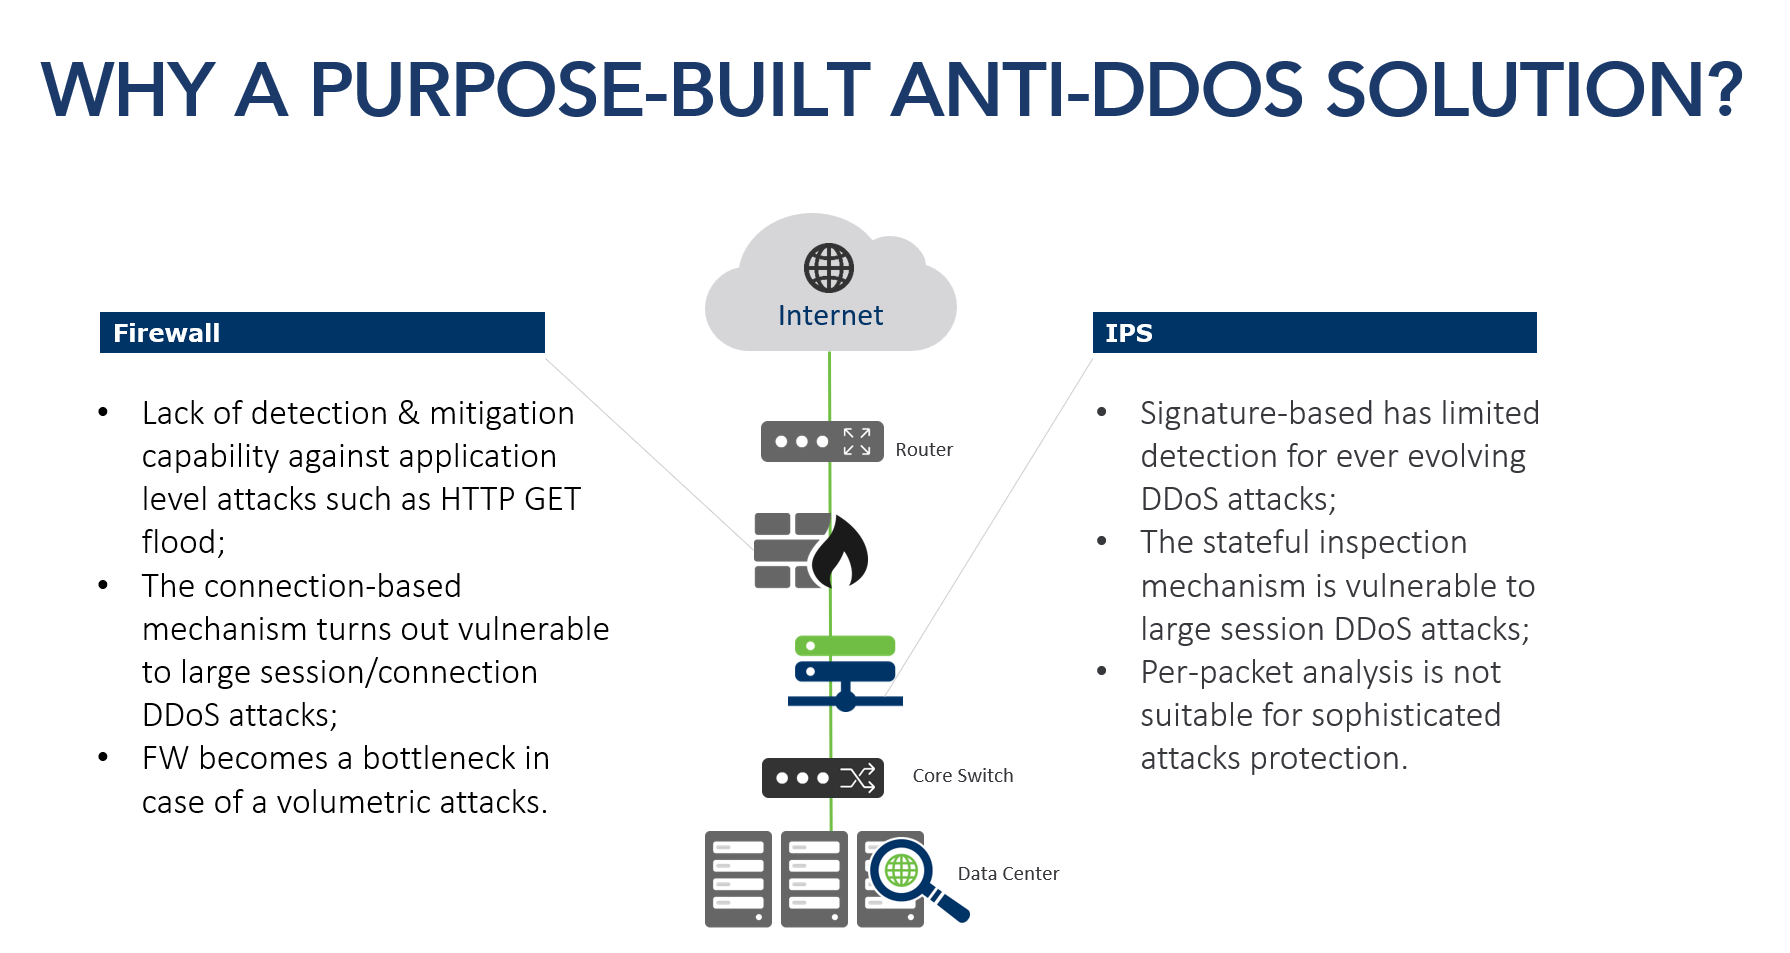 Why IPS and Firewalls Are Not Anti-DDoS Solutions? - NSFOCUS, Inc., a global and cyber security leader, protects enterprises and carriers advanced cyber